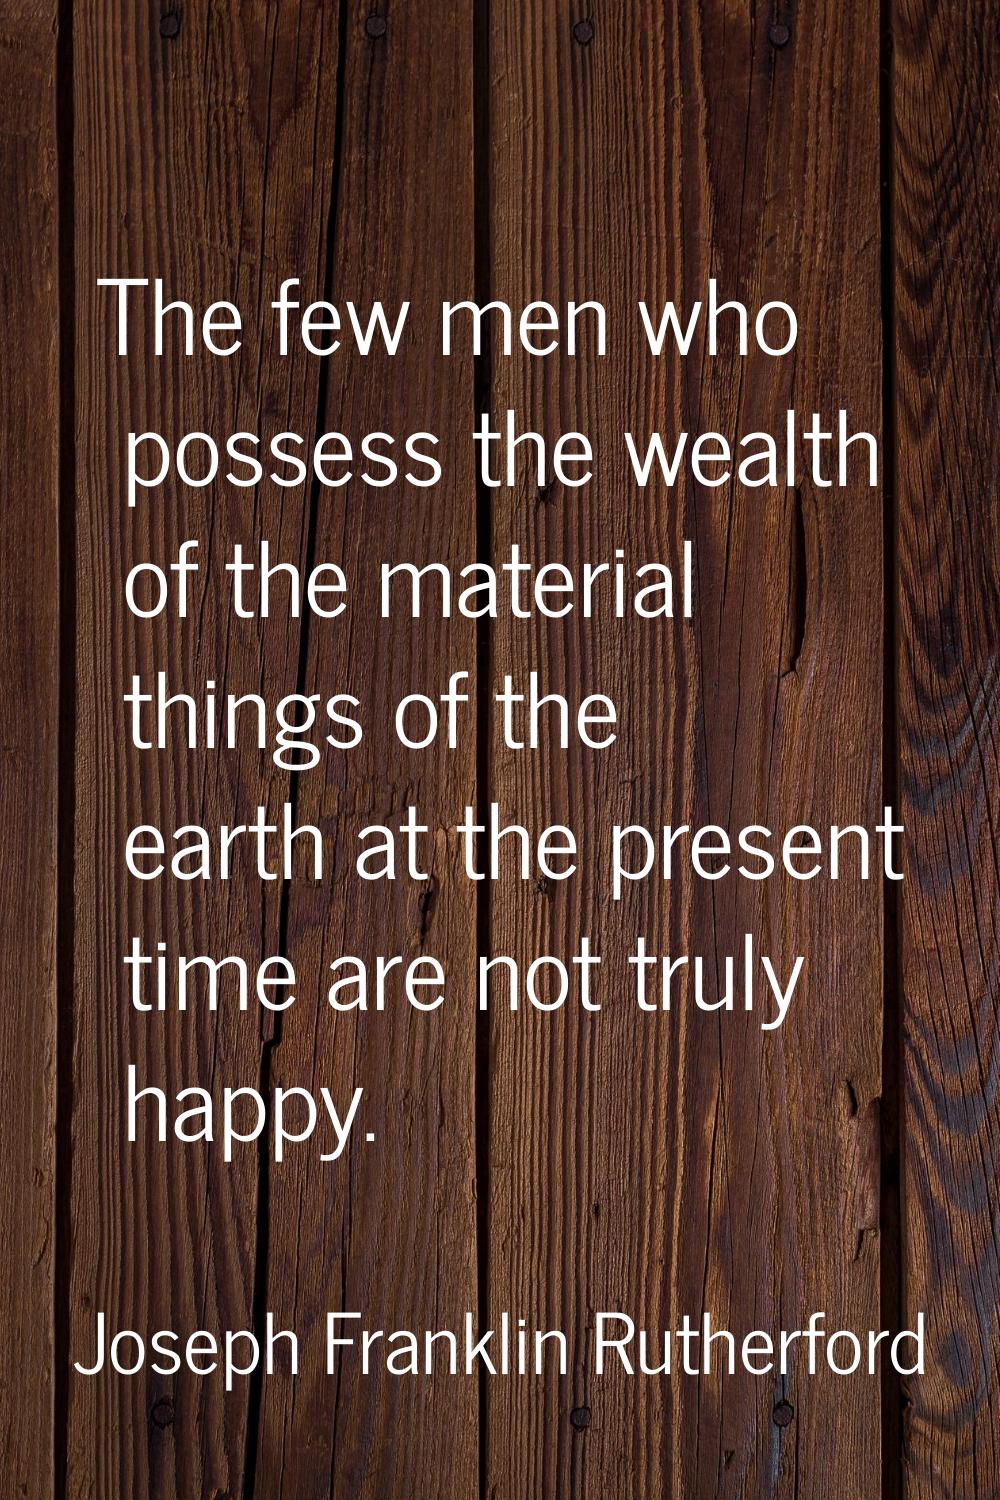 The few men who possess the wealth of the material things of the earth at the present time are not 